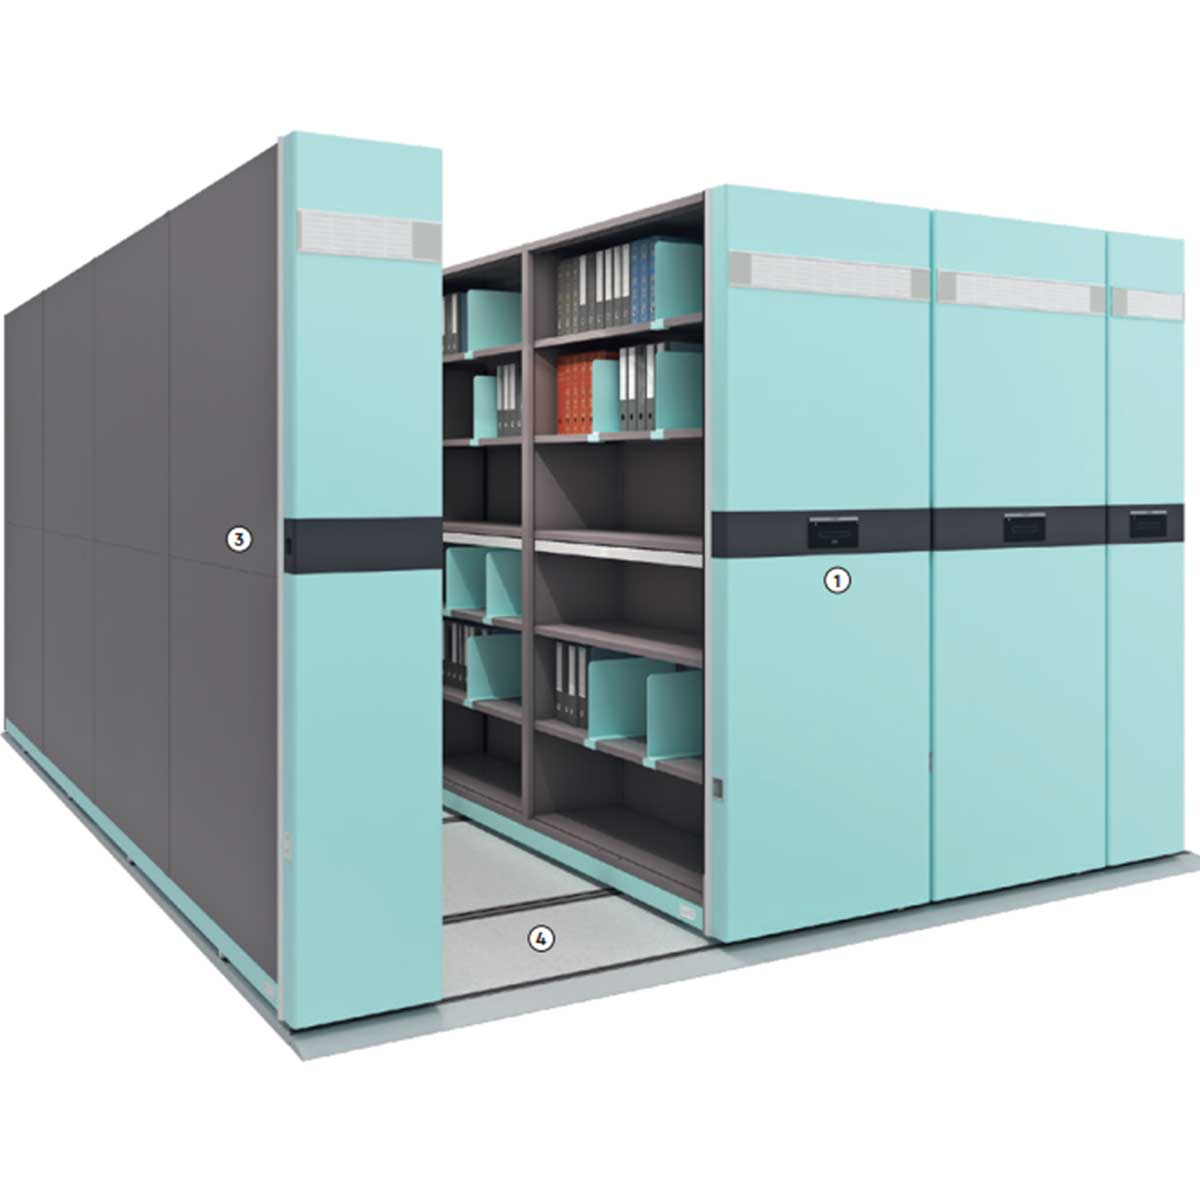 Mobile compactor storage Manufacturers, Suppliers in Soami Nagar